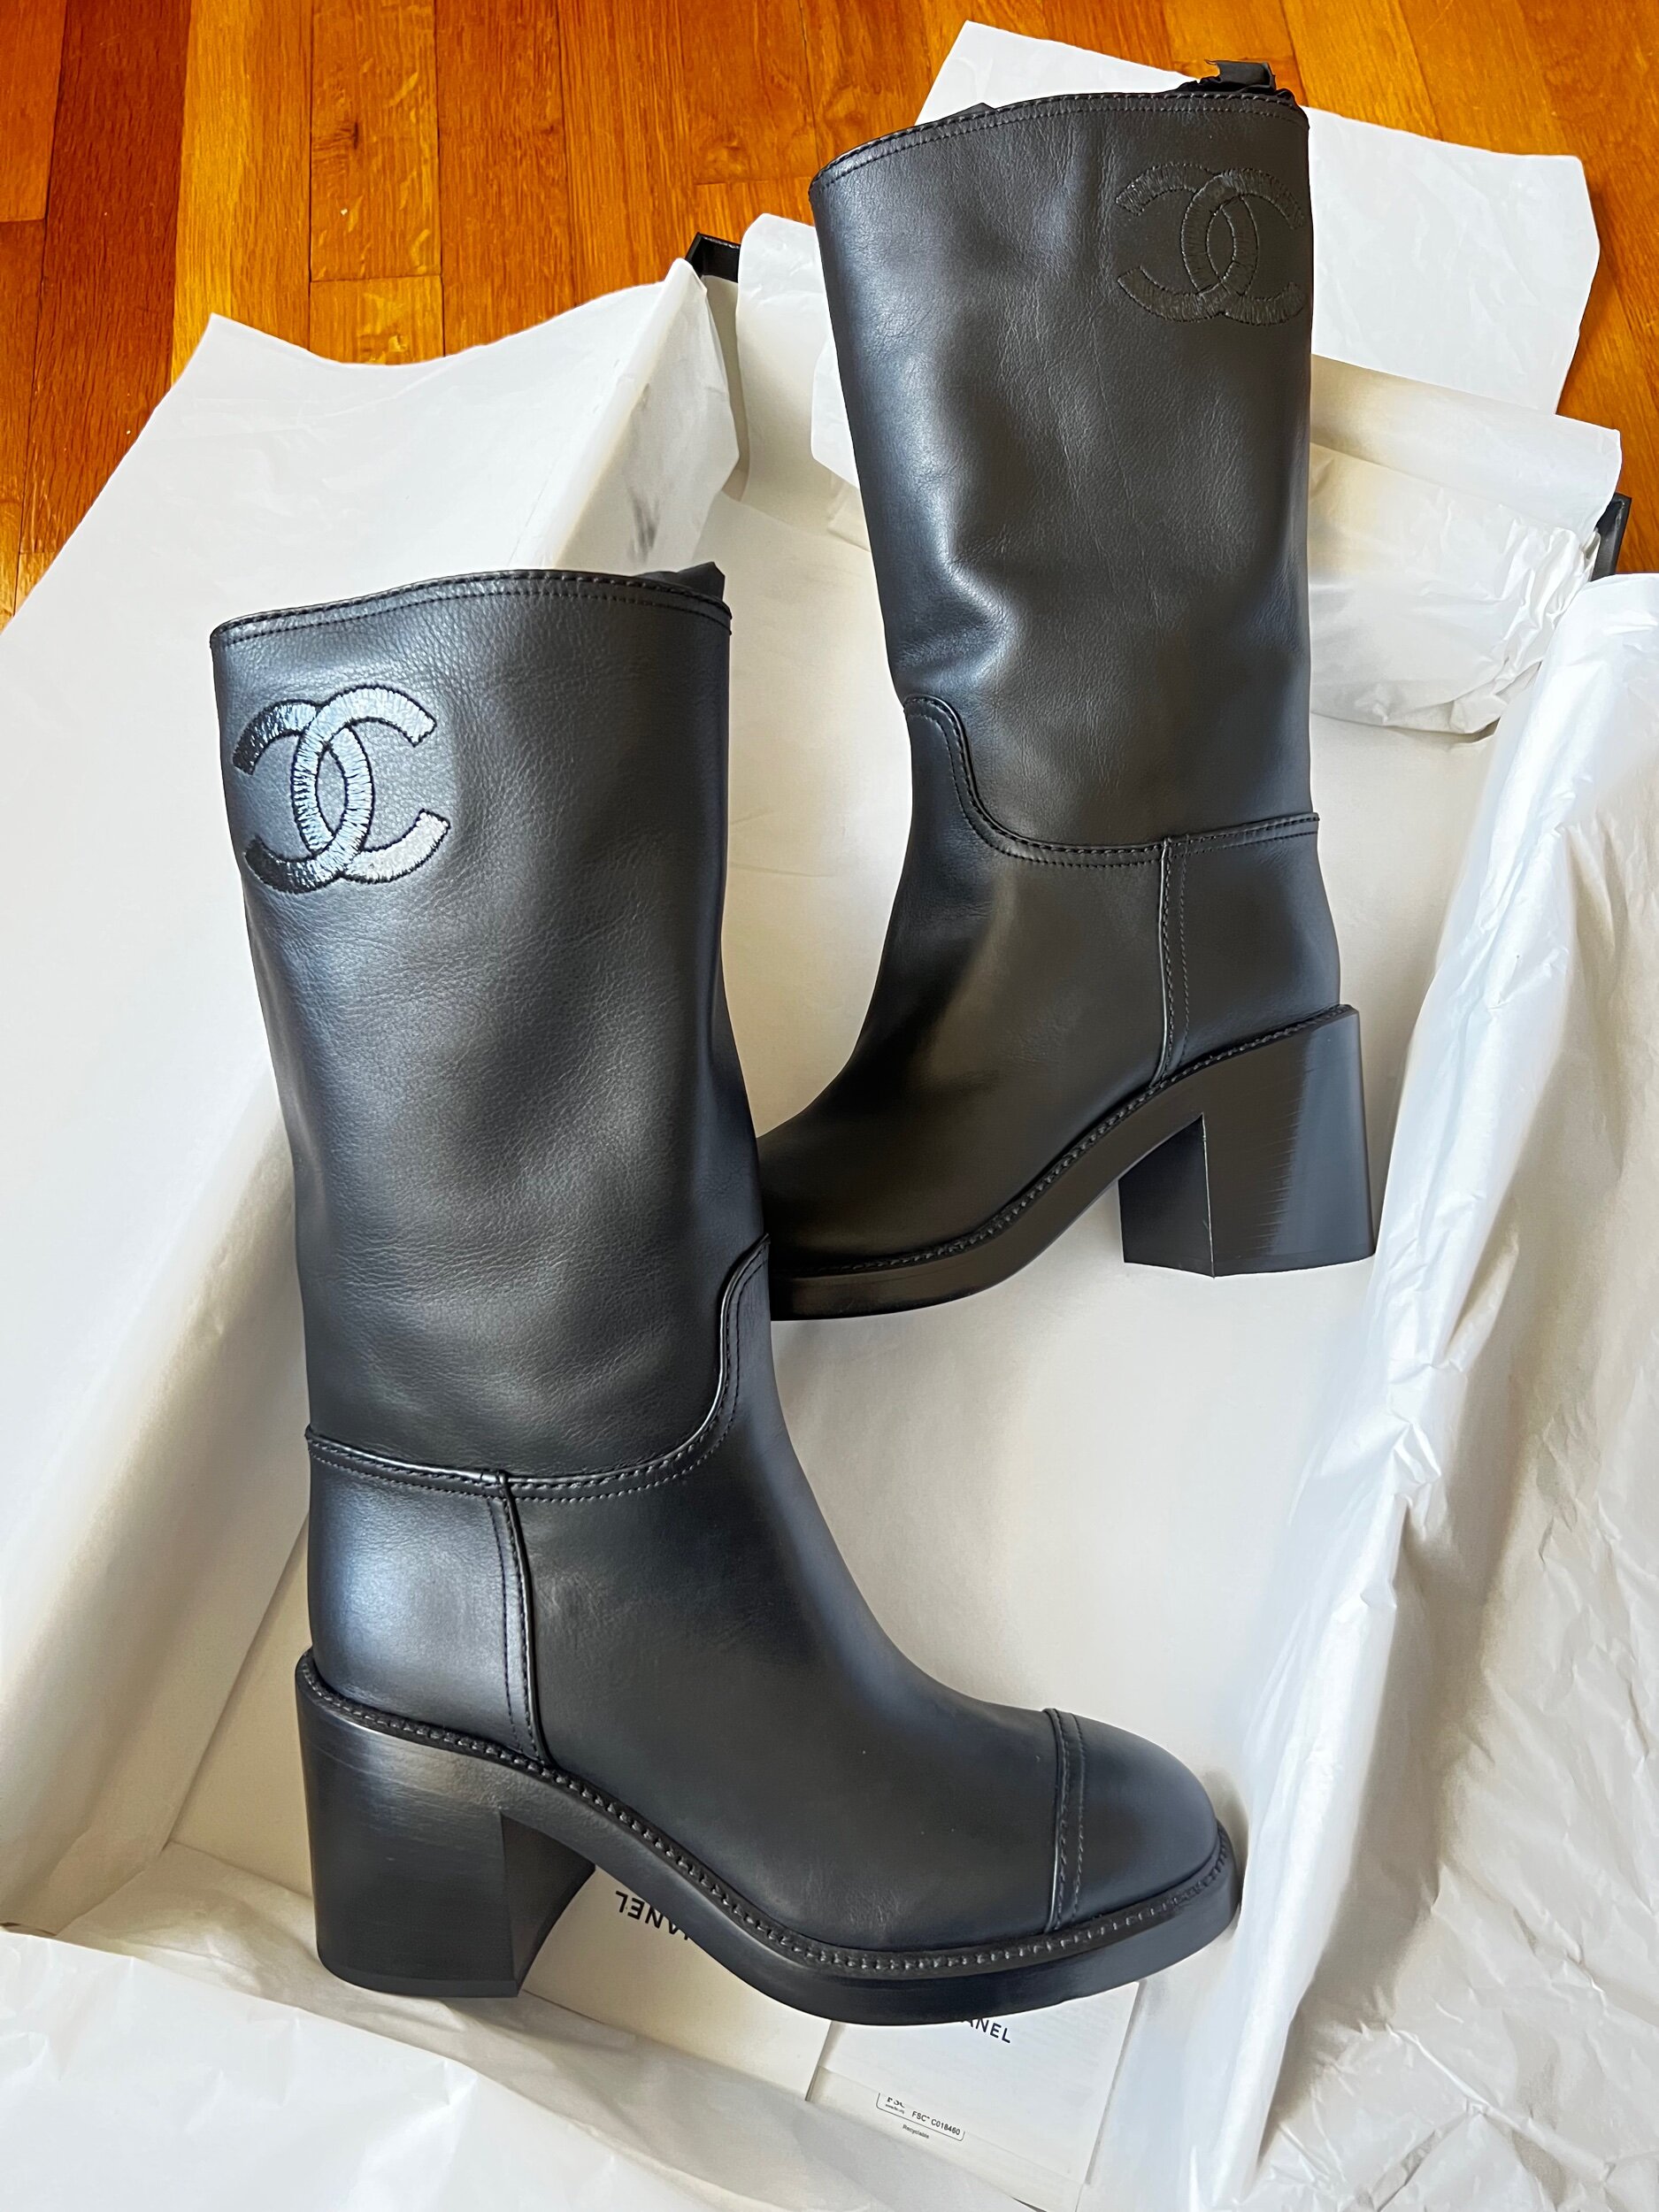 Chanel Boots 39 - 27 For Sale on 1stDibs